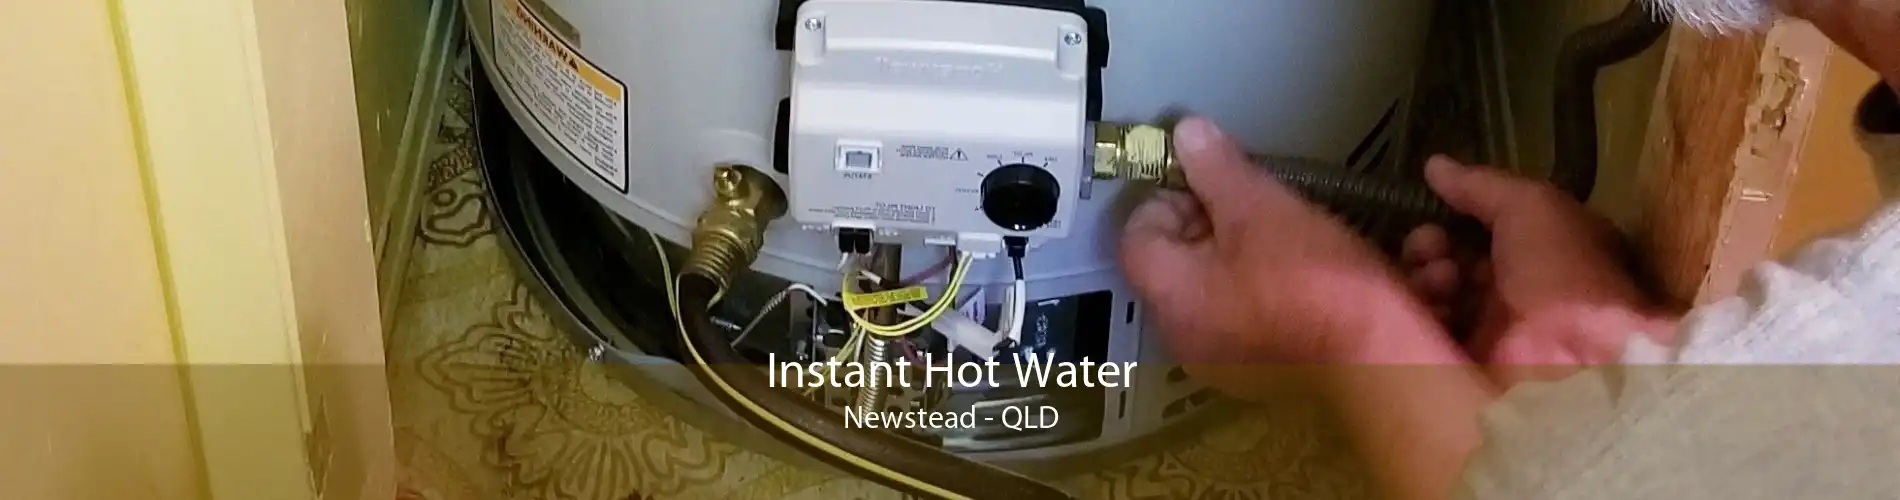 Instant Hot Water Newstead - QLD